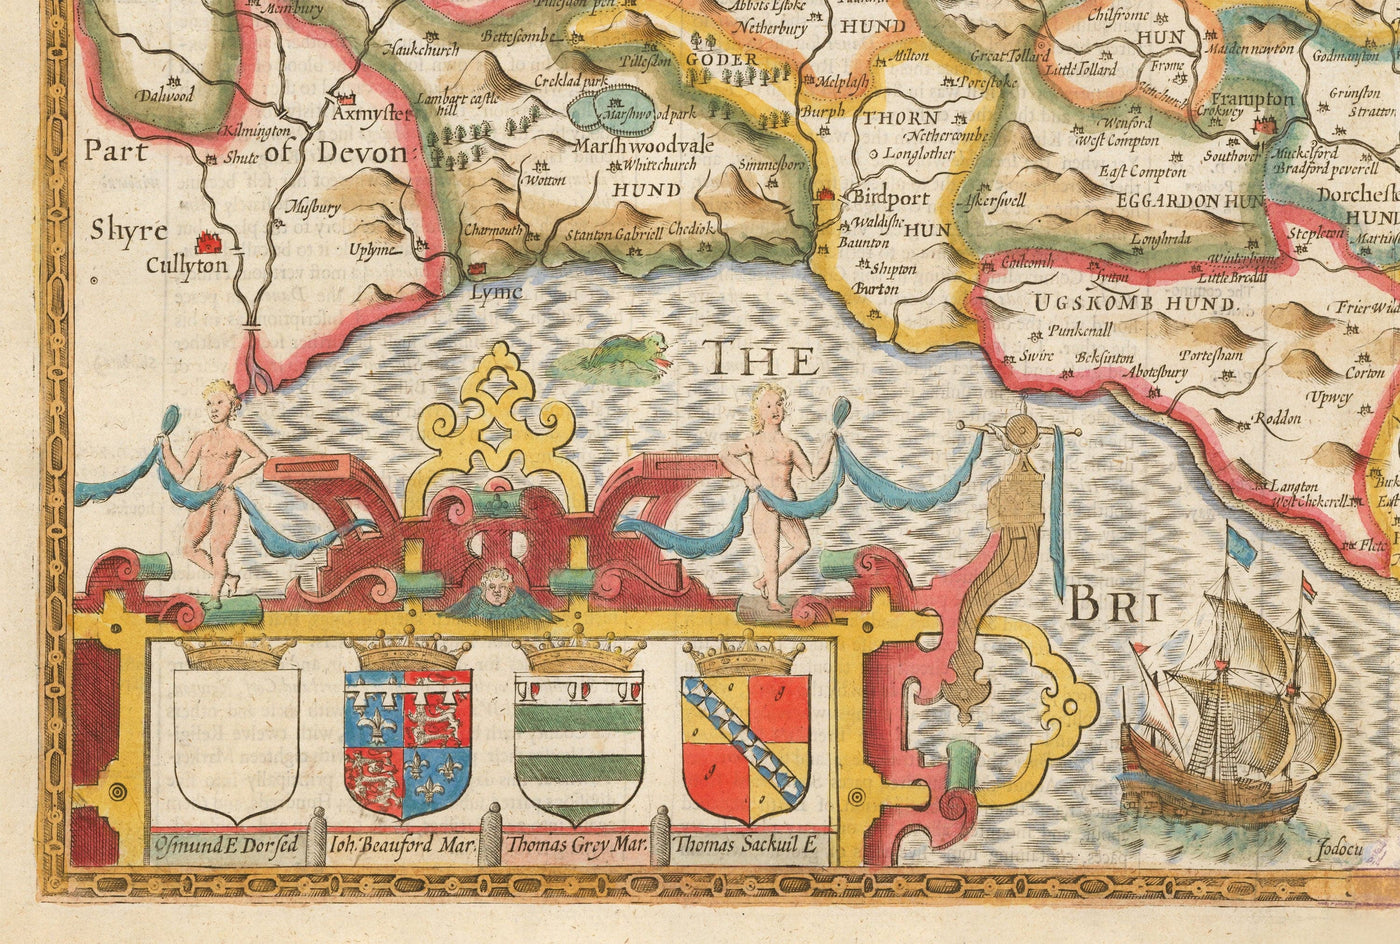 Old Map of Dorset in 1611 by John Speed - Poole, Weymouth, Dorchester, Bridport